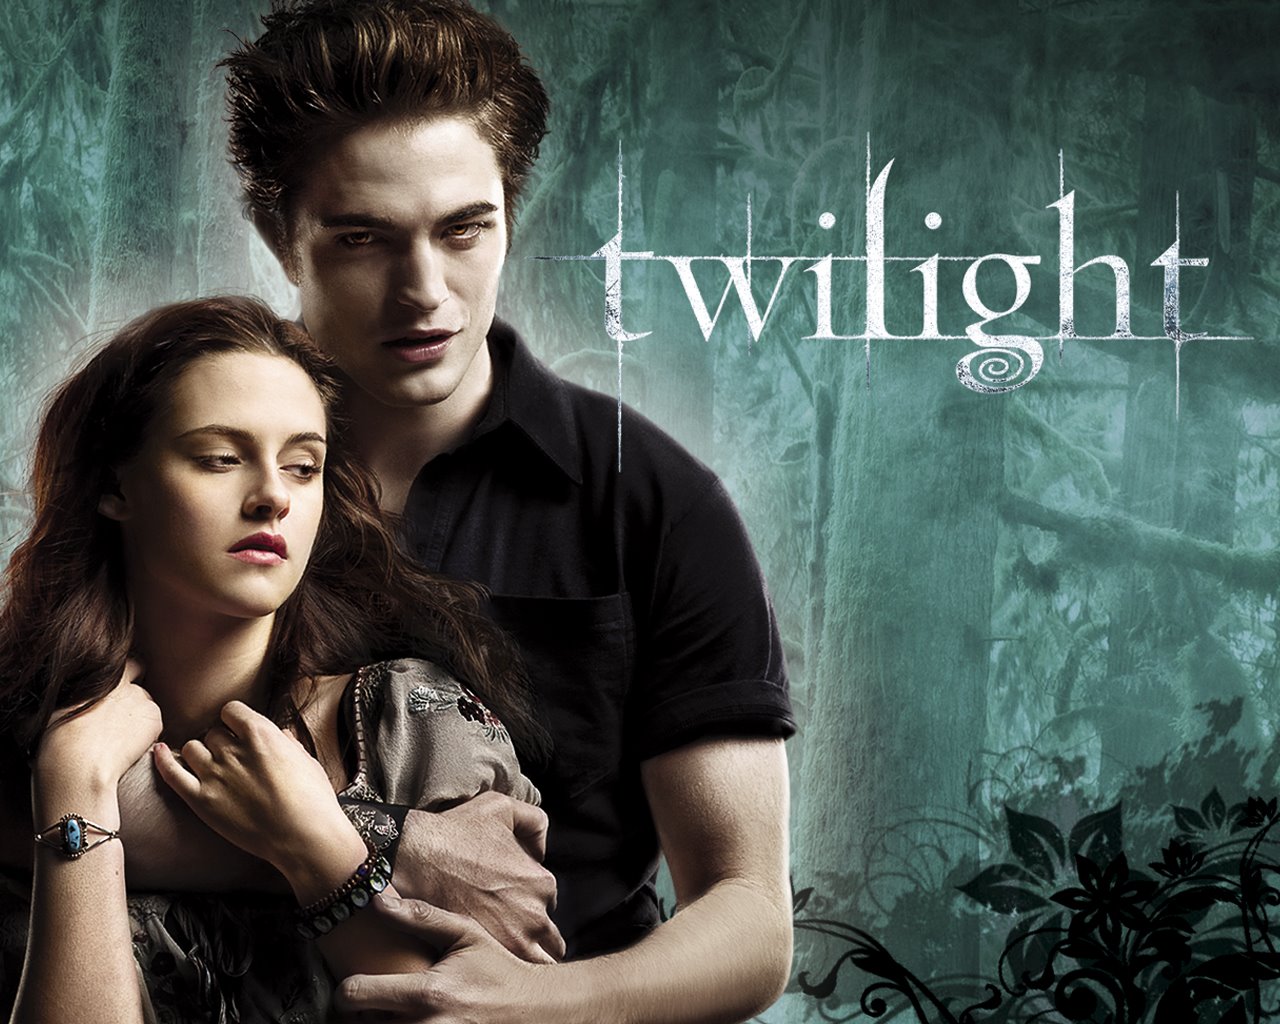 twilight wallpaper,movie,font,photography,vampire,fictional character